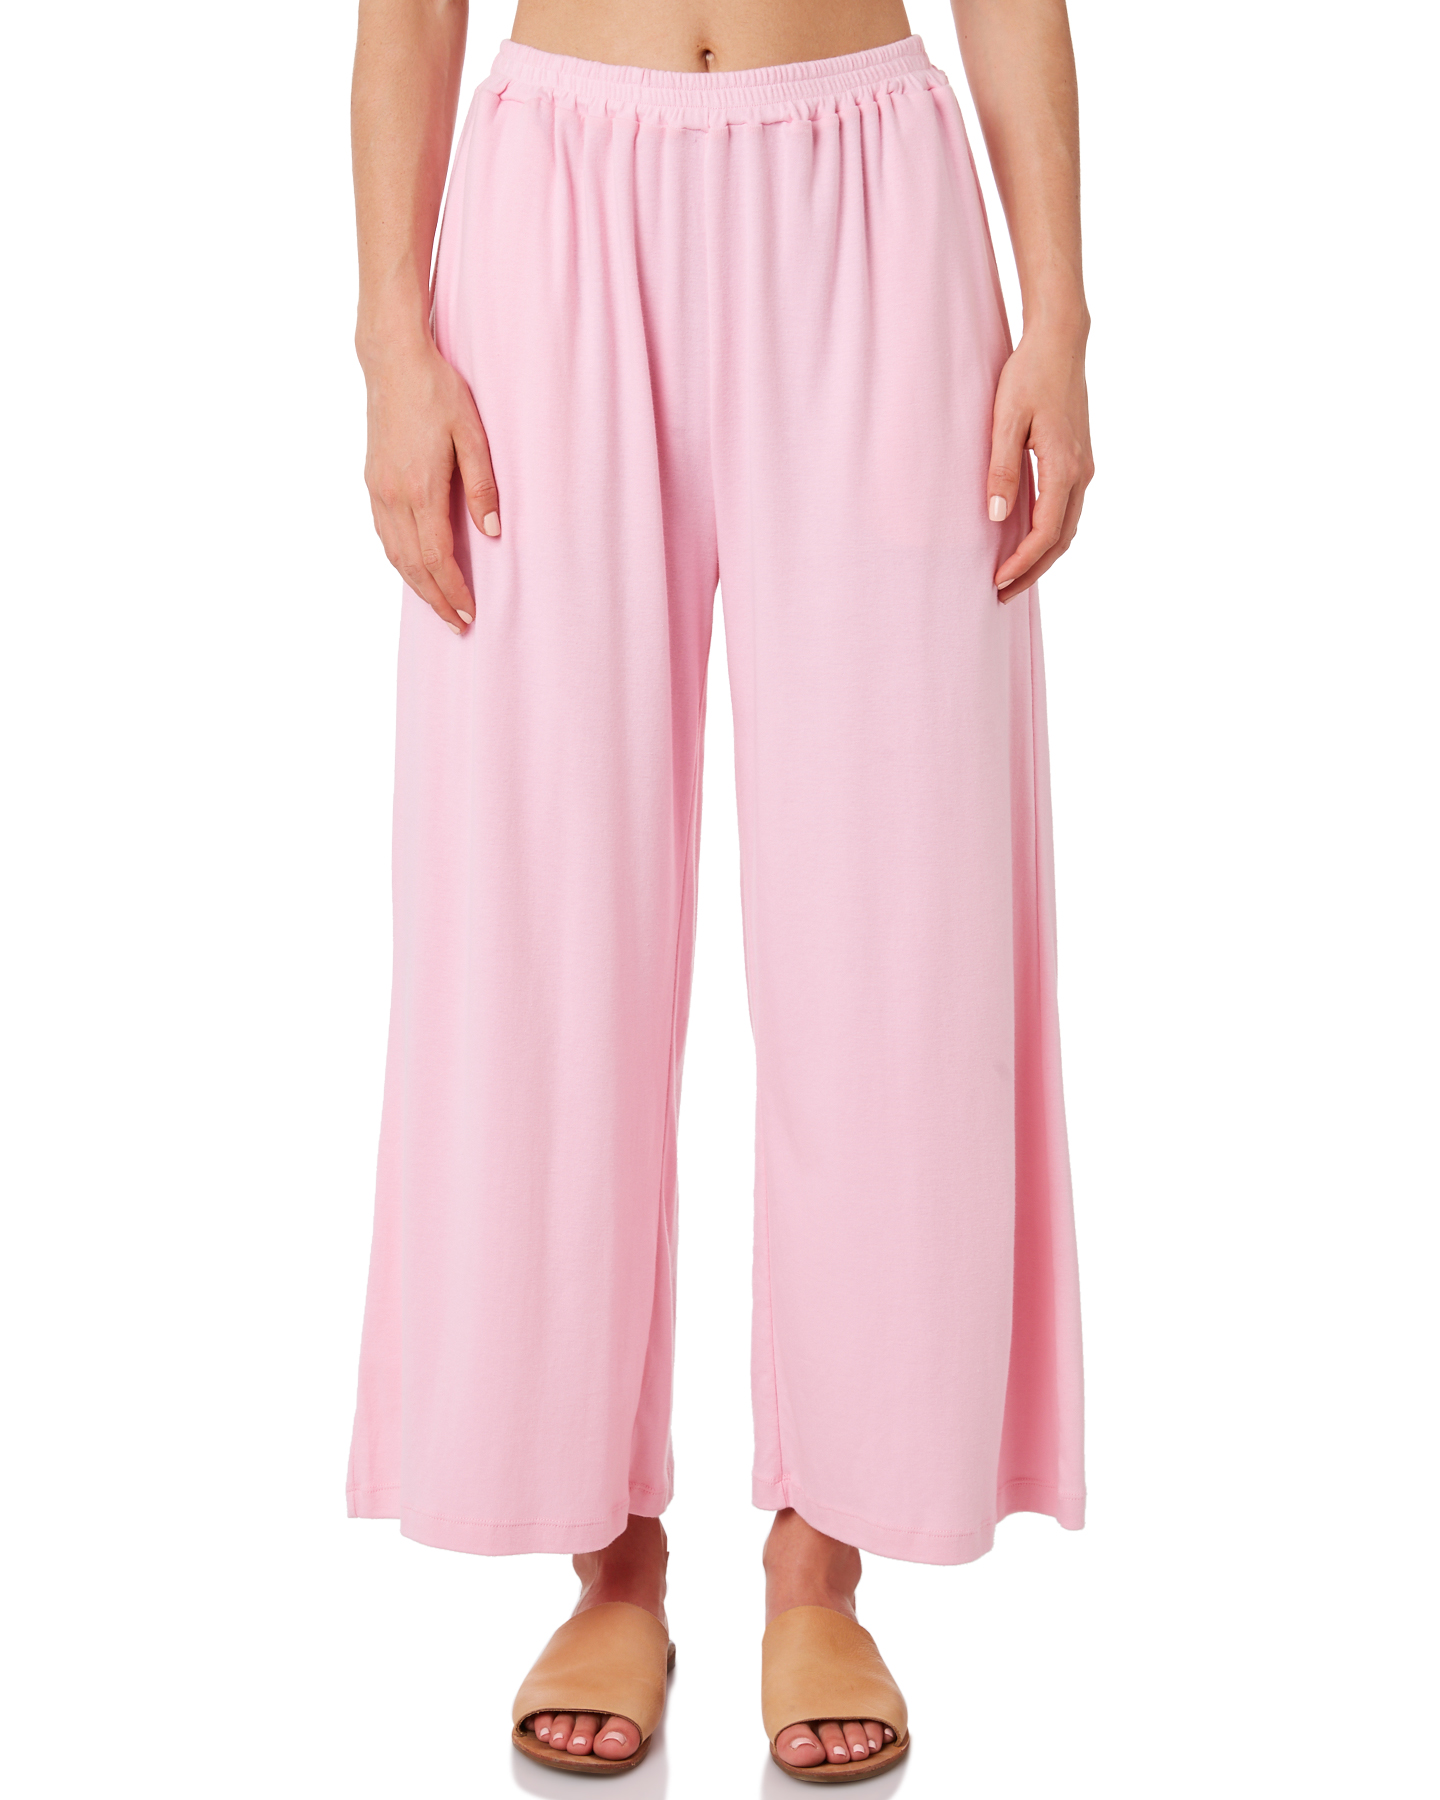 Zulu And Zephyr Fever Pant - Pink | SurfStitch